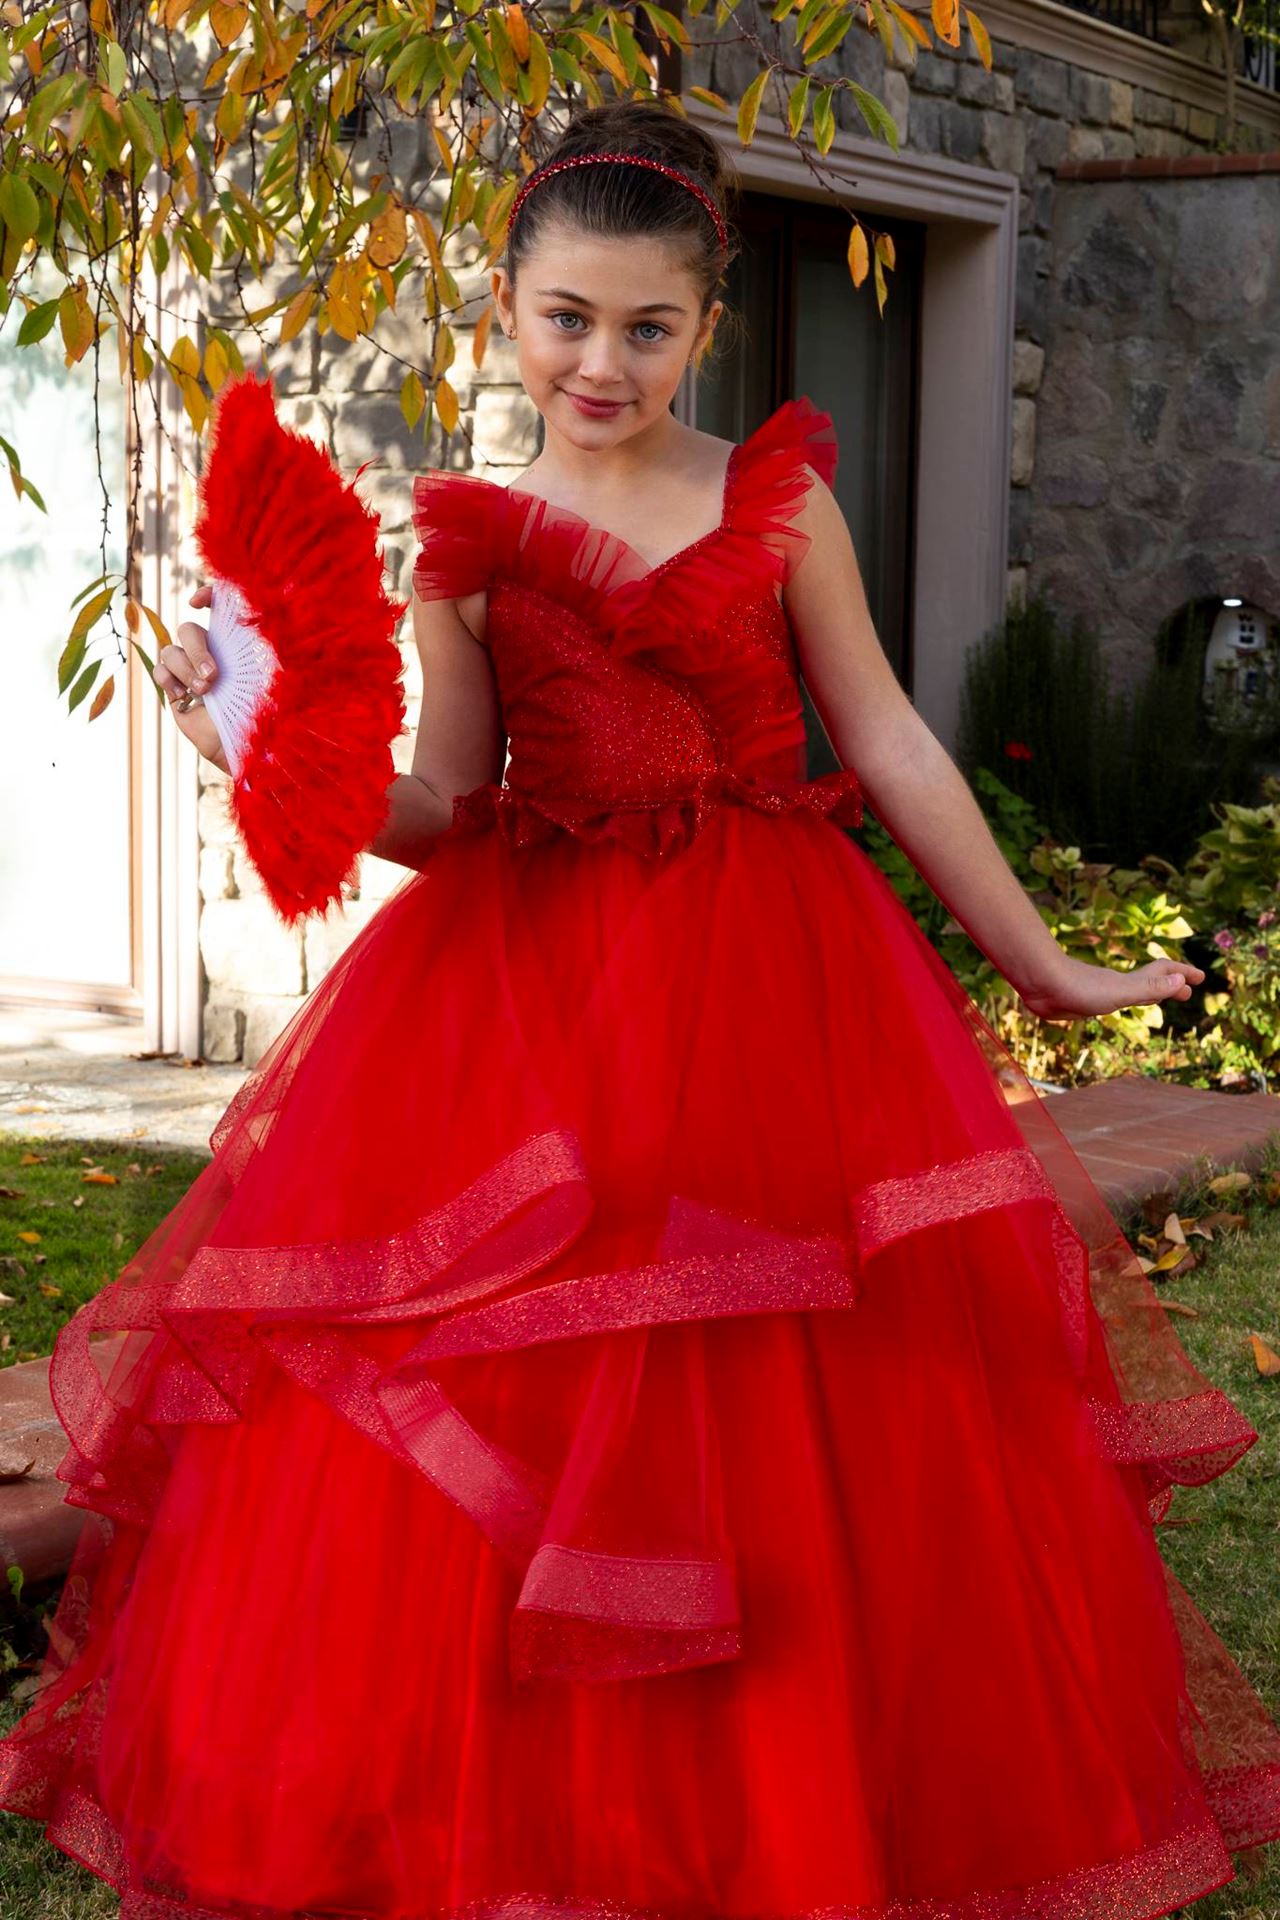 Belle 7-11 Years Old Girl Dress 30081 Red